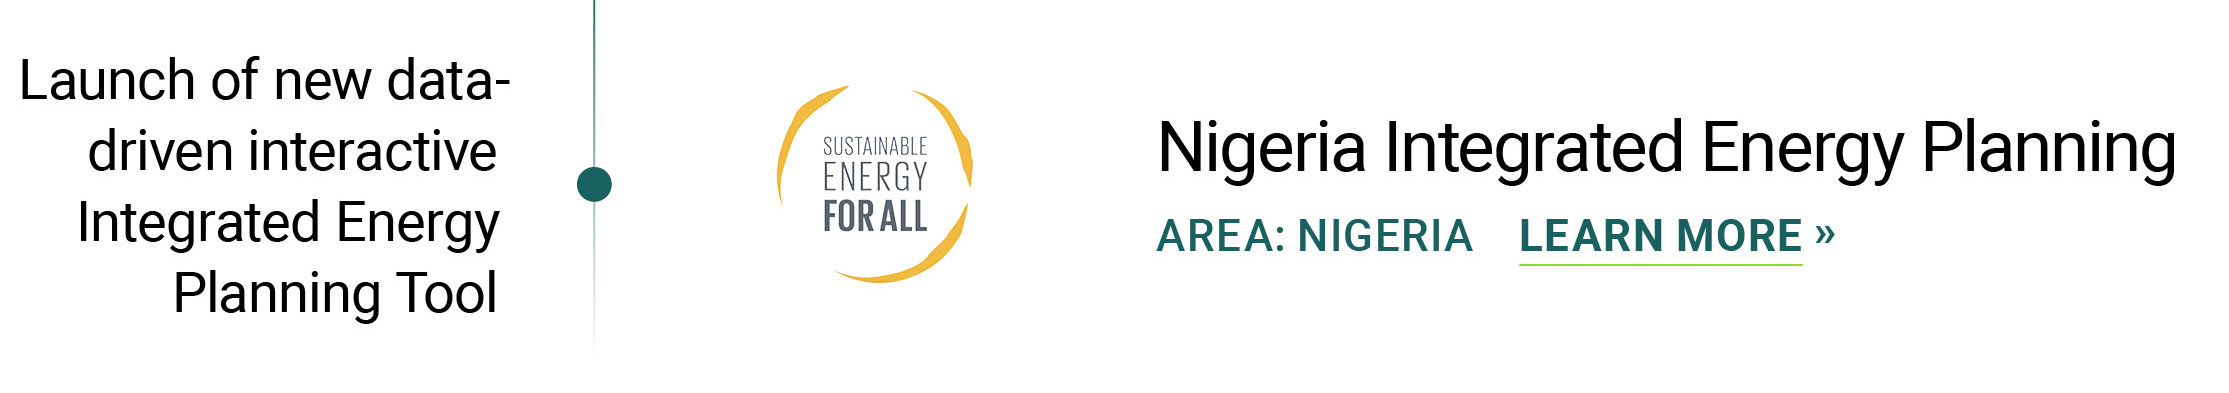 Feb 2022 Nigeria Integrated Energy Planning SEforALL Nigeria Launch of new data-driven interactive Integrated Energy Planning Tool for Nigeria